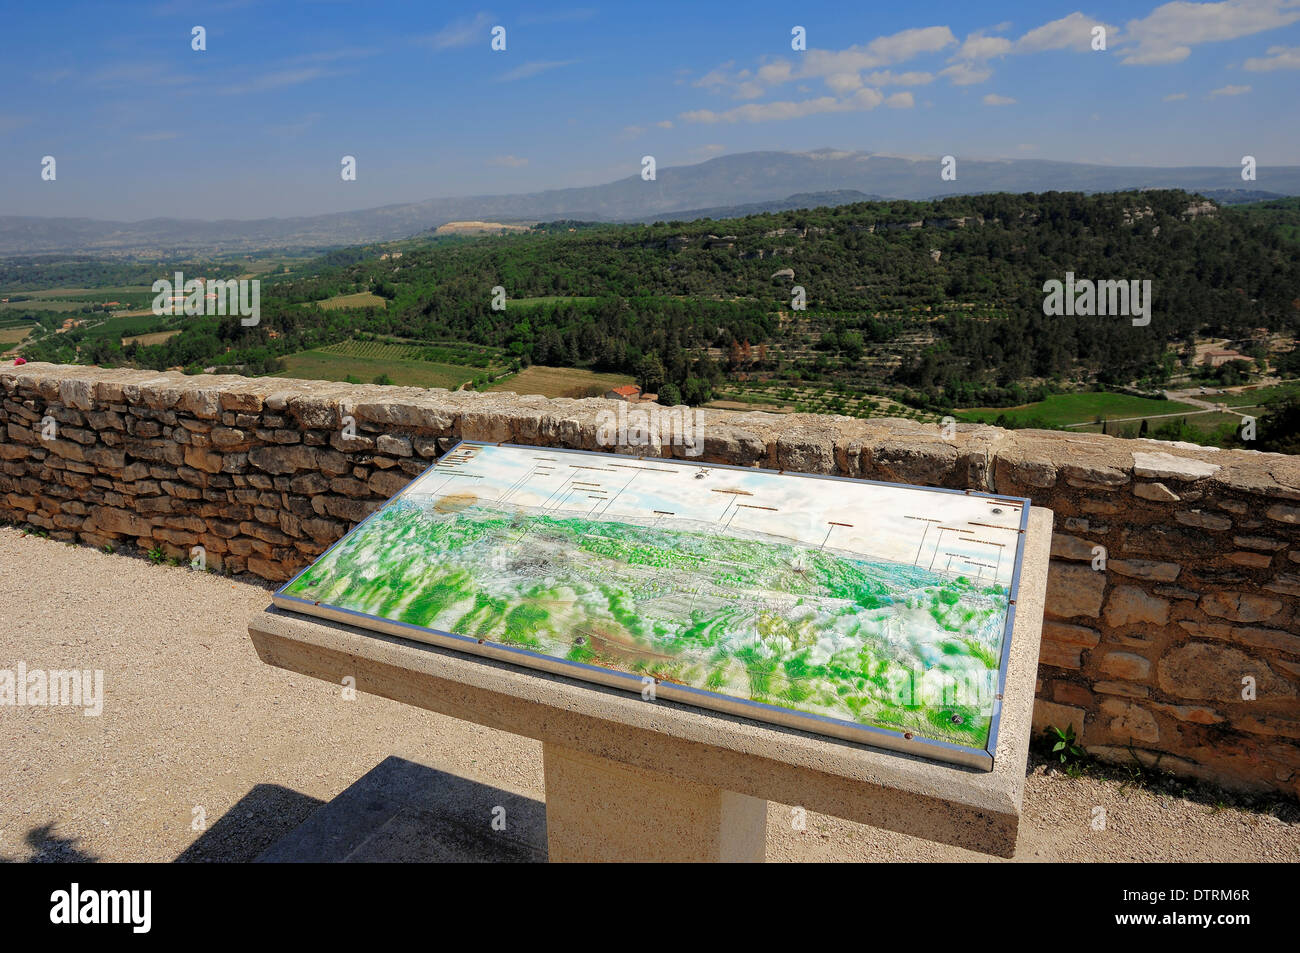 Information board at point of view, Venasque, Vaucluse, Provence-Alpes-Cote d'Azur, Southern France Stock Photo